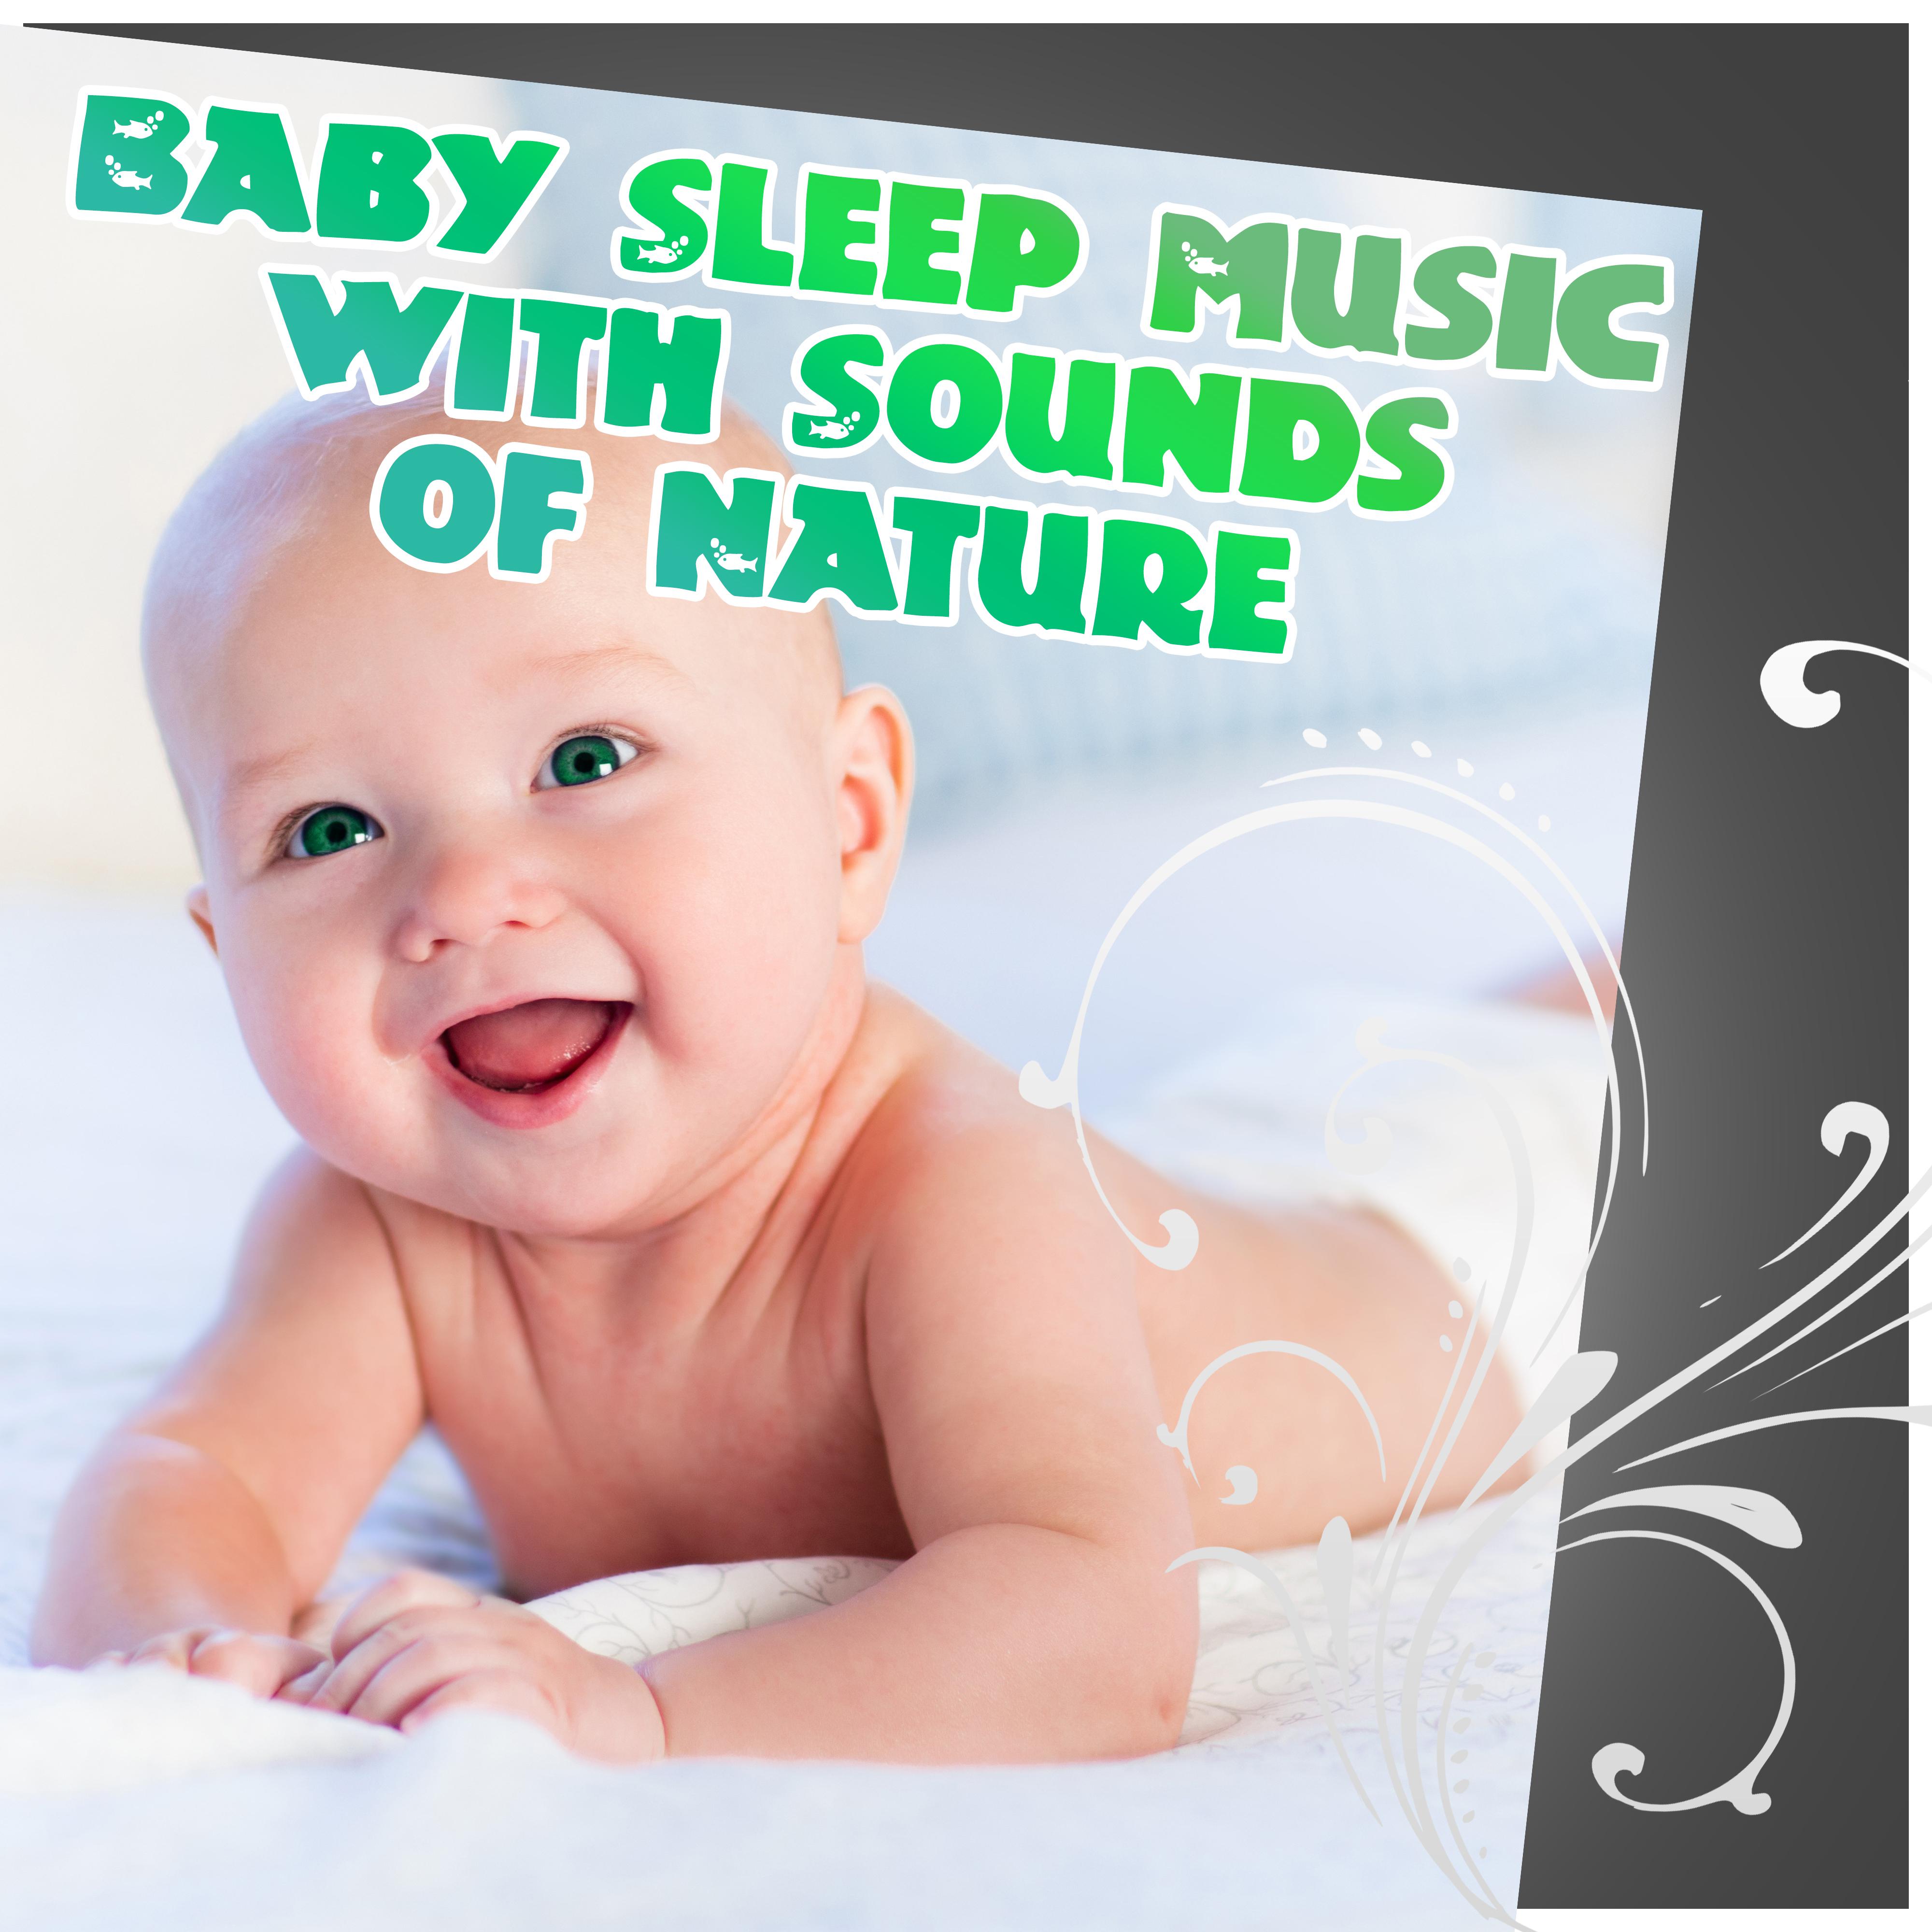 Baby Sleep Music with Sounds of Nature - Soft Nature Music for Your Baby to Relax, Fall Asleep and Sleep Through the Night, Relaxing Sounds